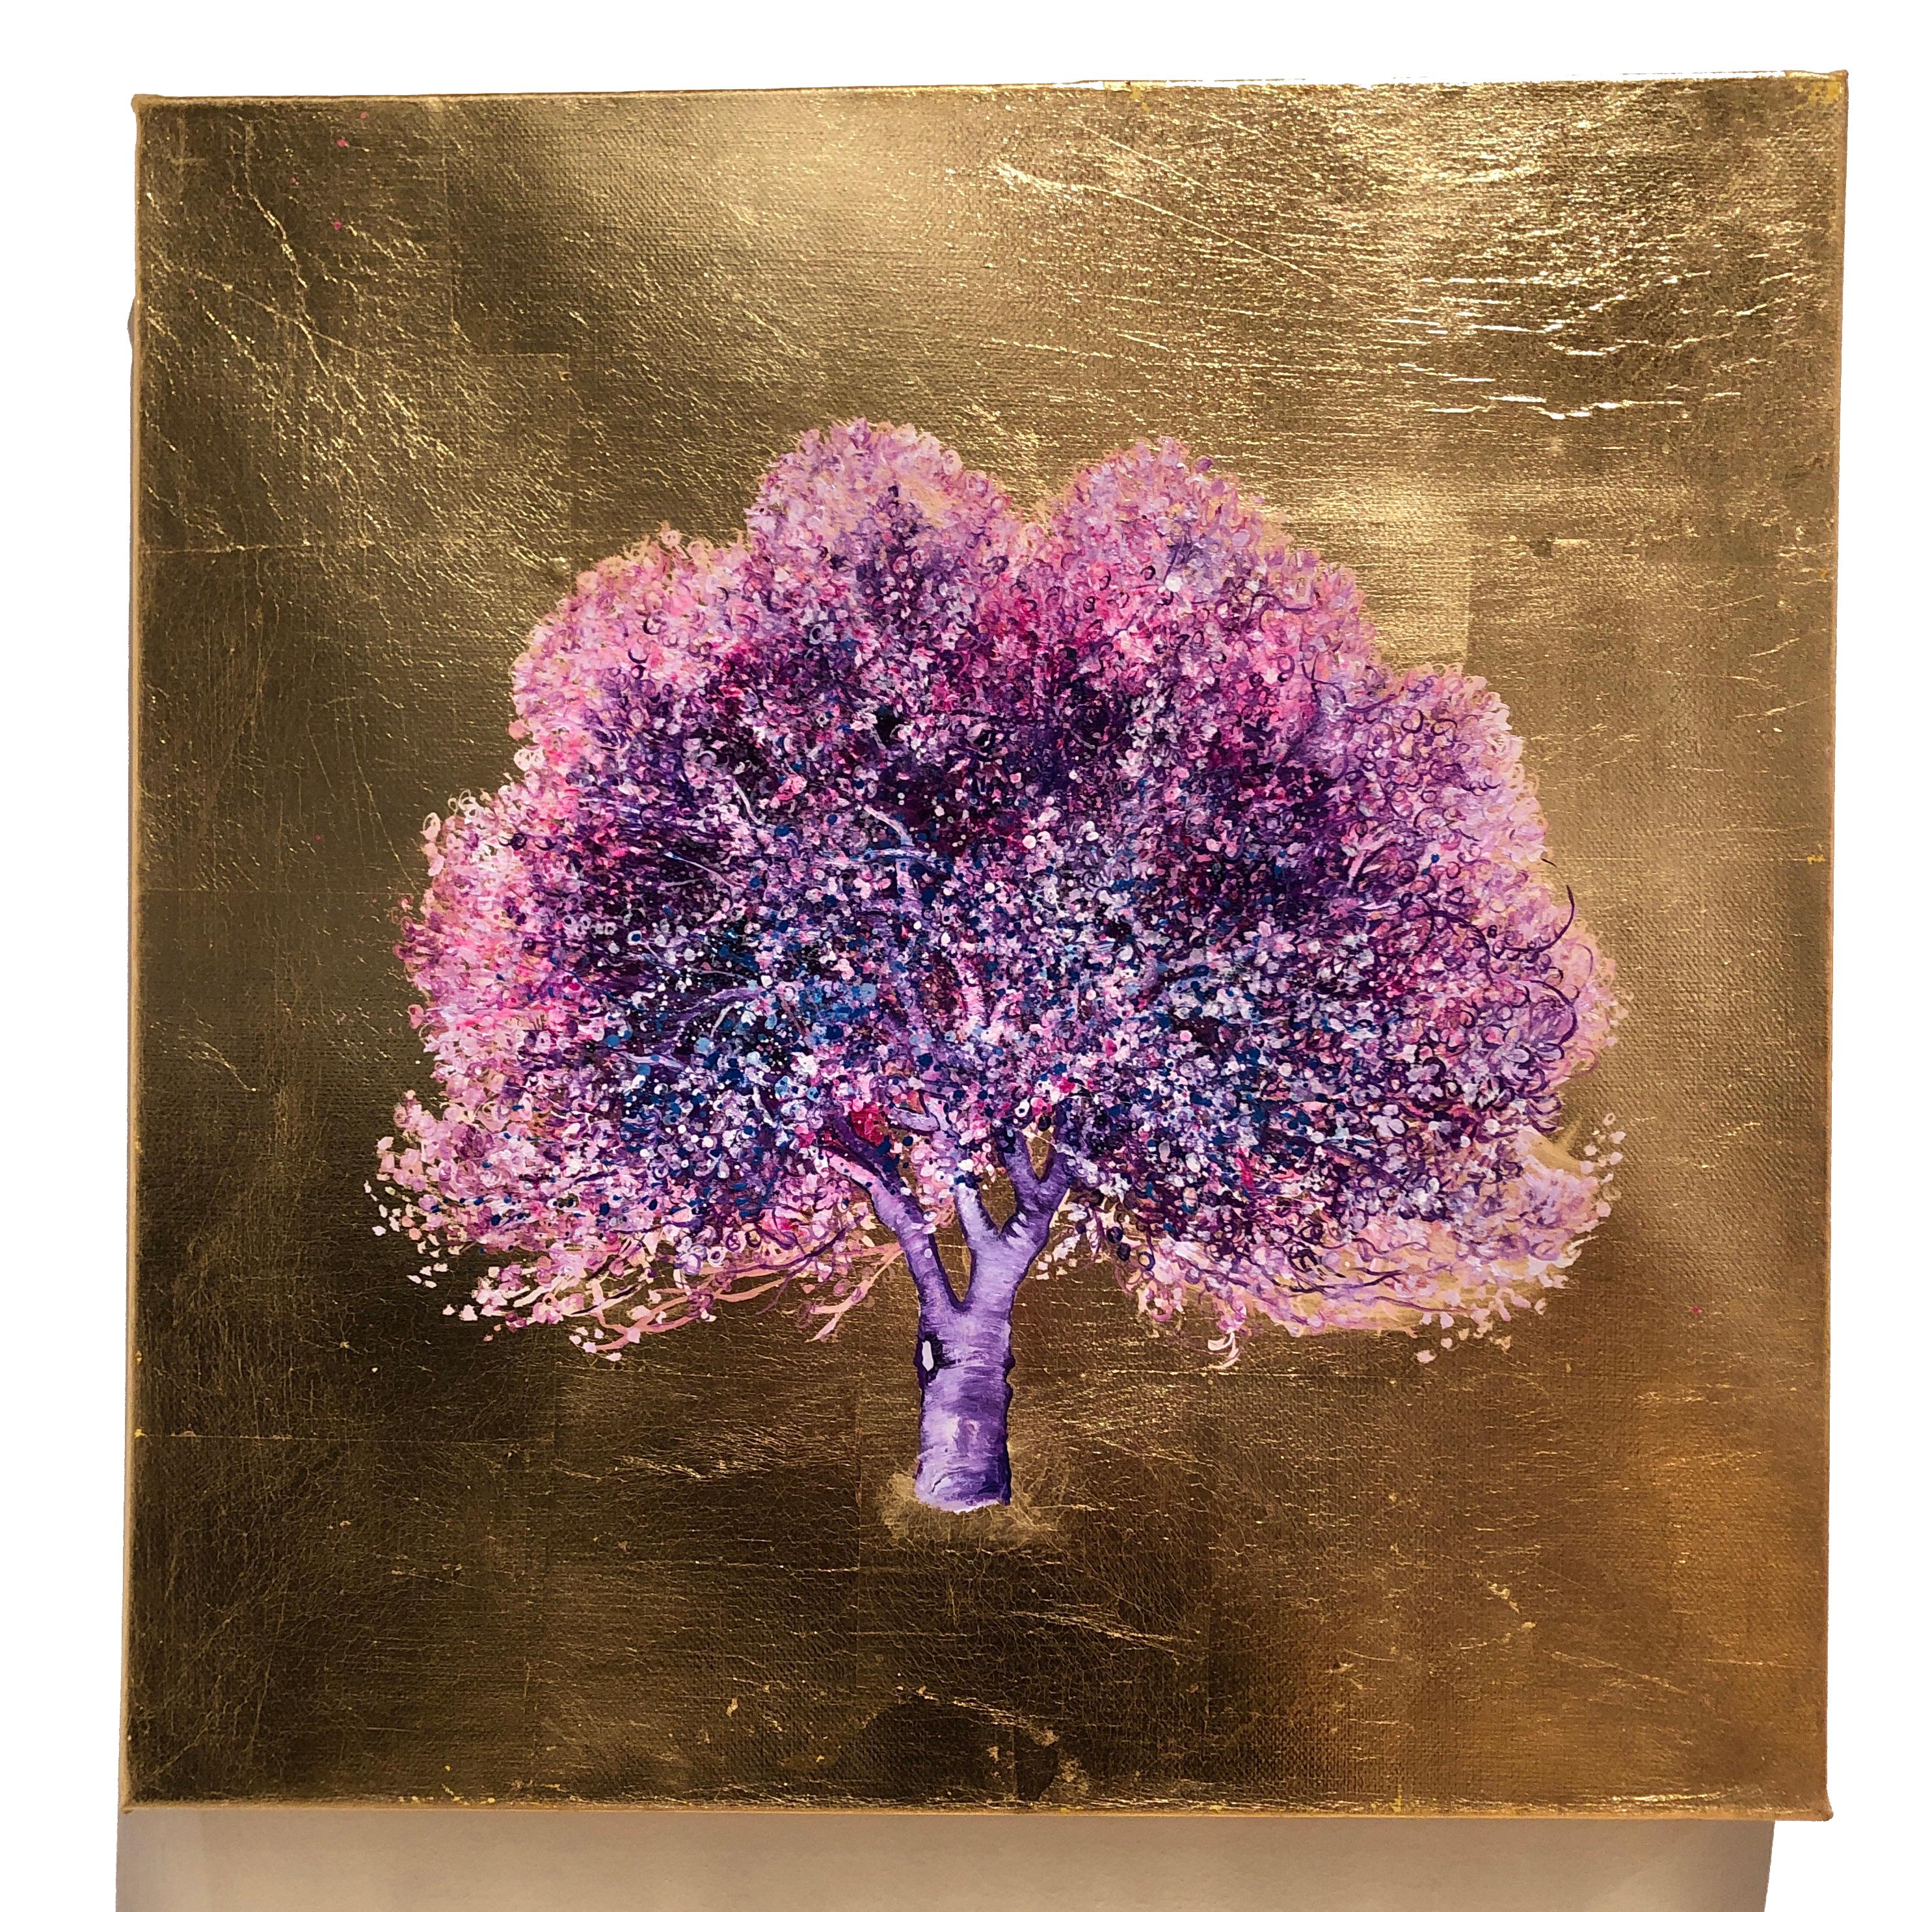 Anastasia Gklava Landscape Painting - Let the Sunshine In, Purple Blossom Tree, Oil on Canvas Gold Leaf Painting 